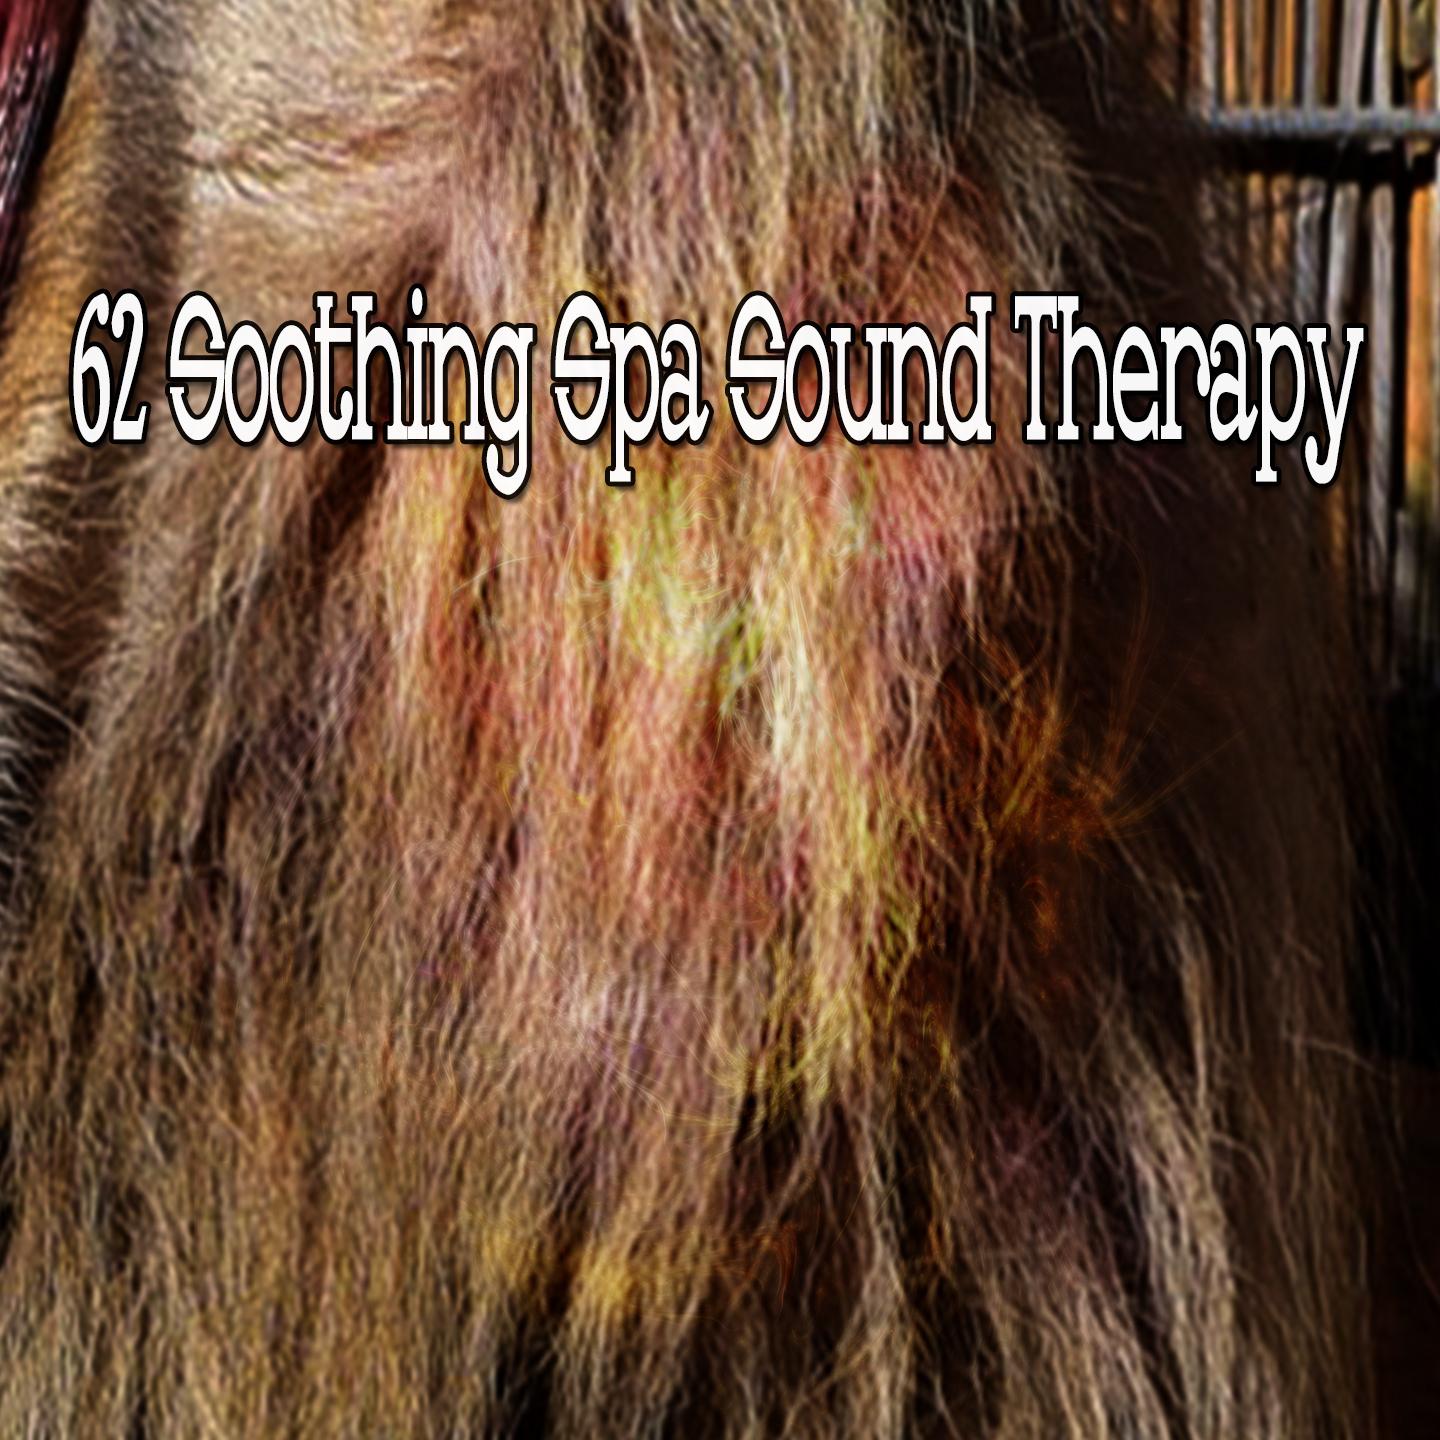 62 Soothing Spa Sound Therapy